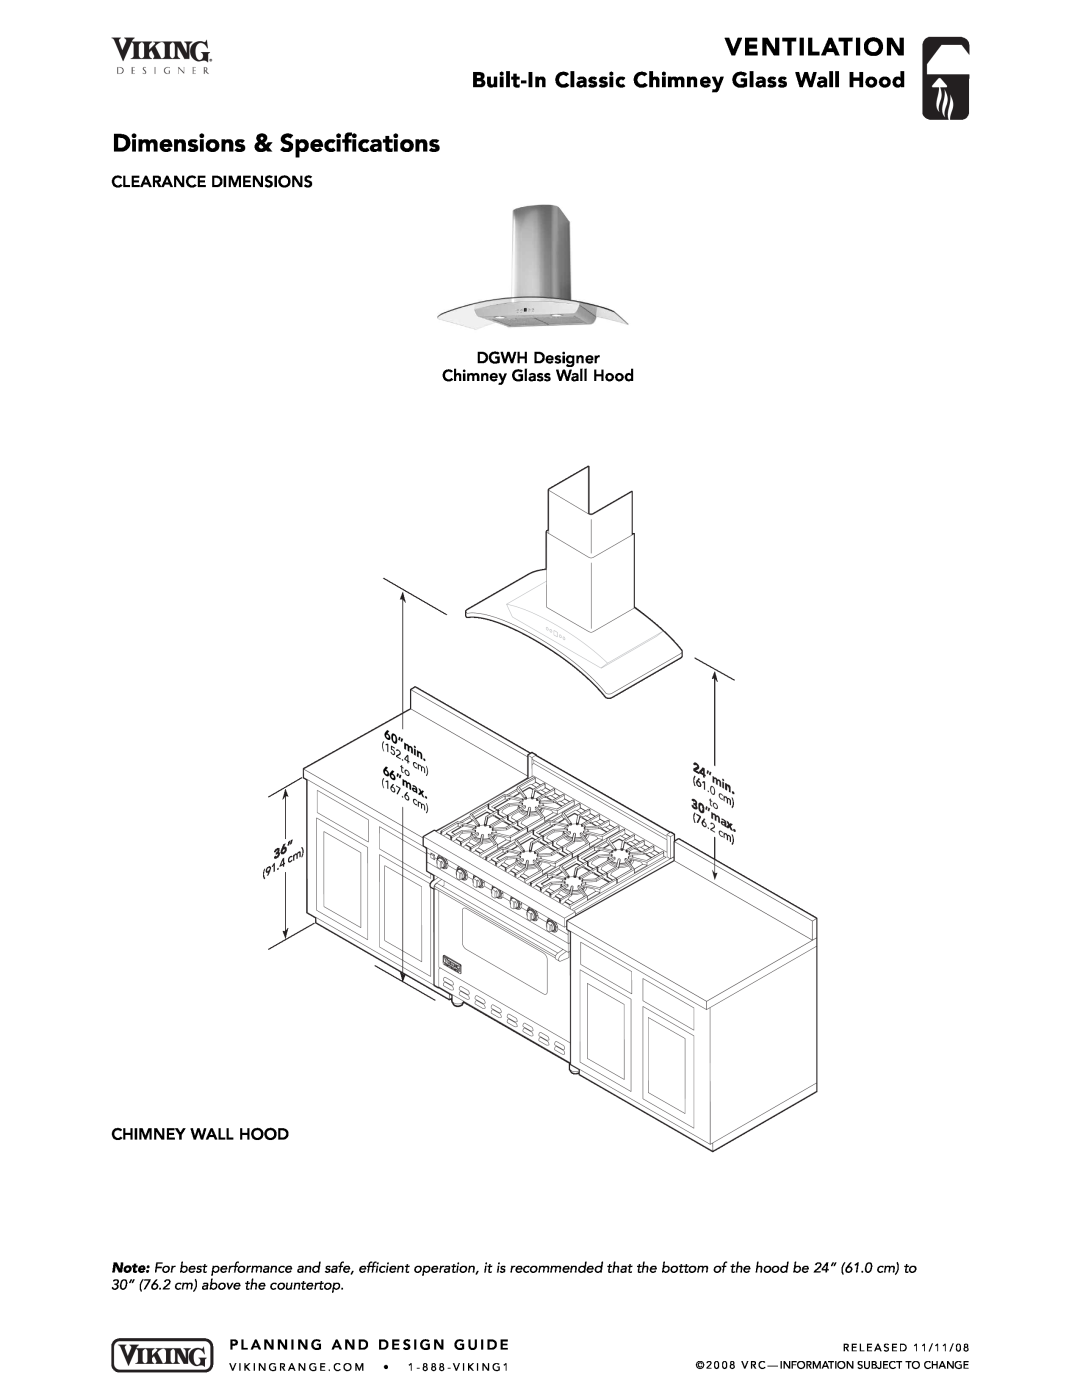 Viking CLEARANCE DIMENSIONS DGWH Designer Chimney Glass Wall Hood, Ventilation, Dimensions & Specifications, Planning 